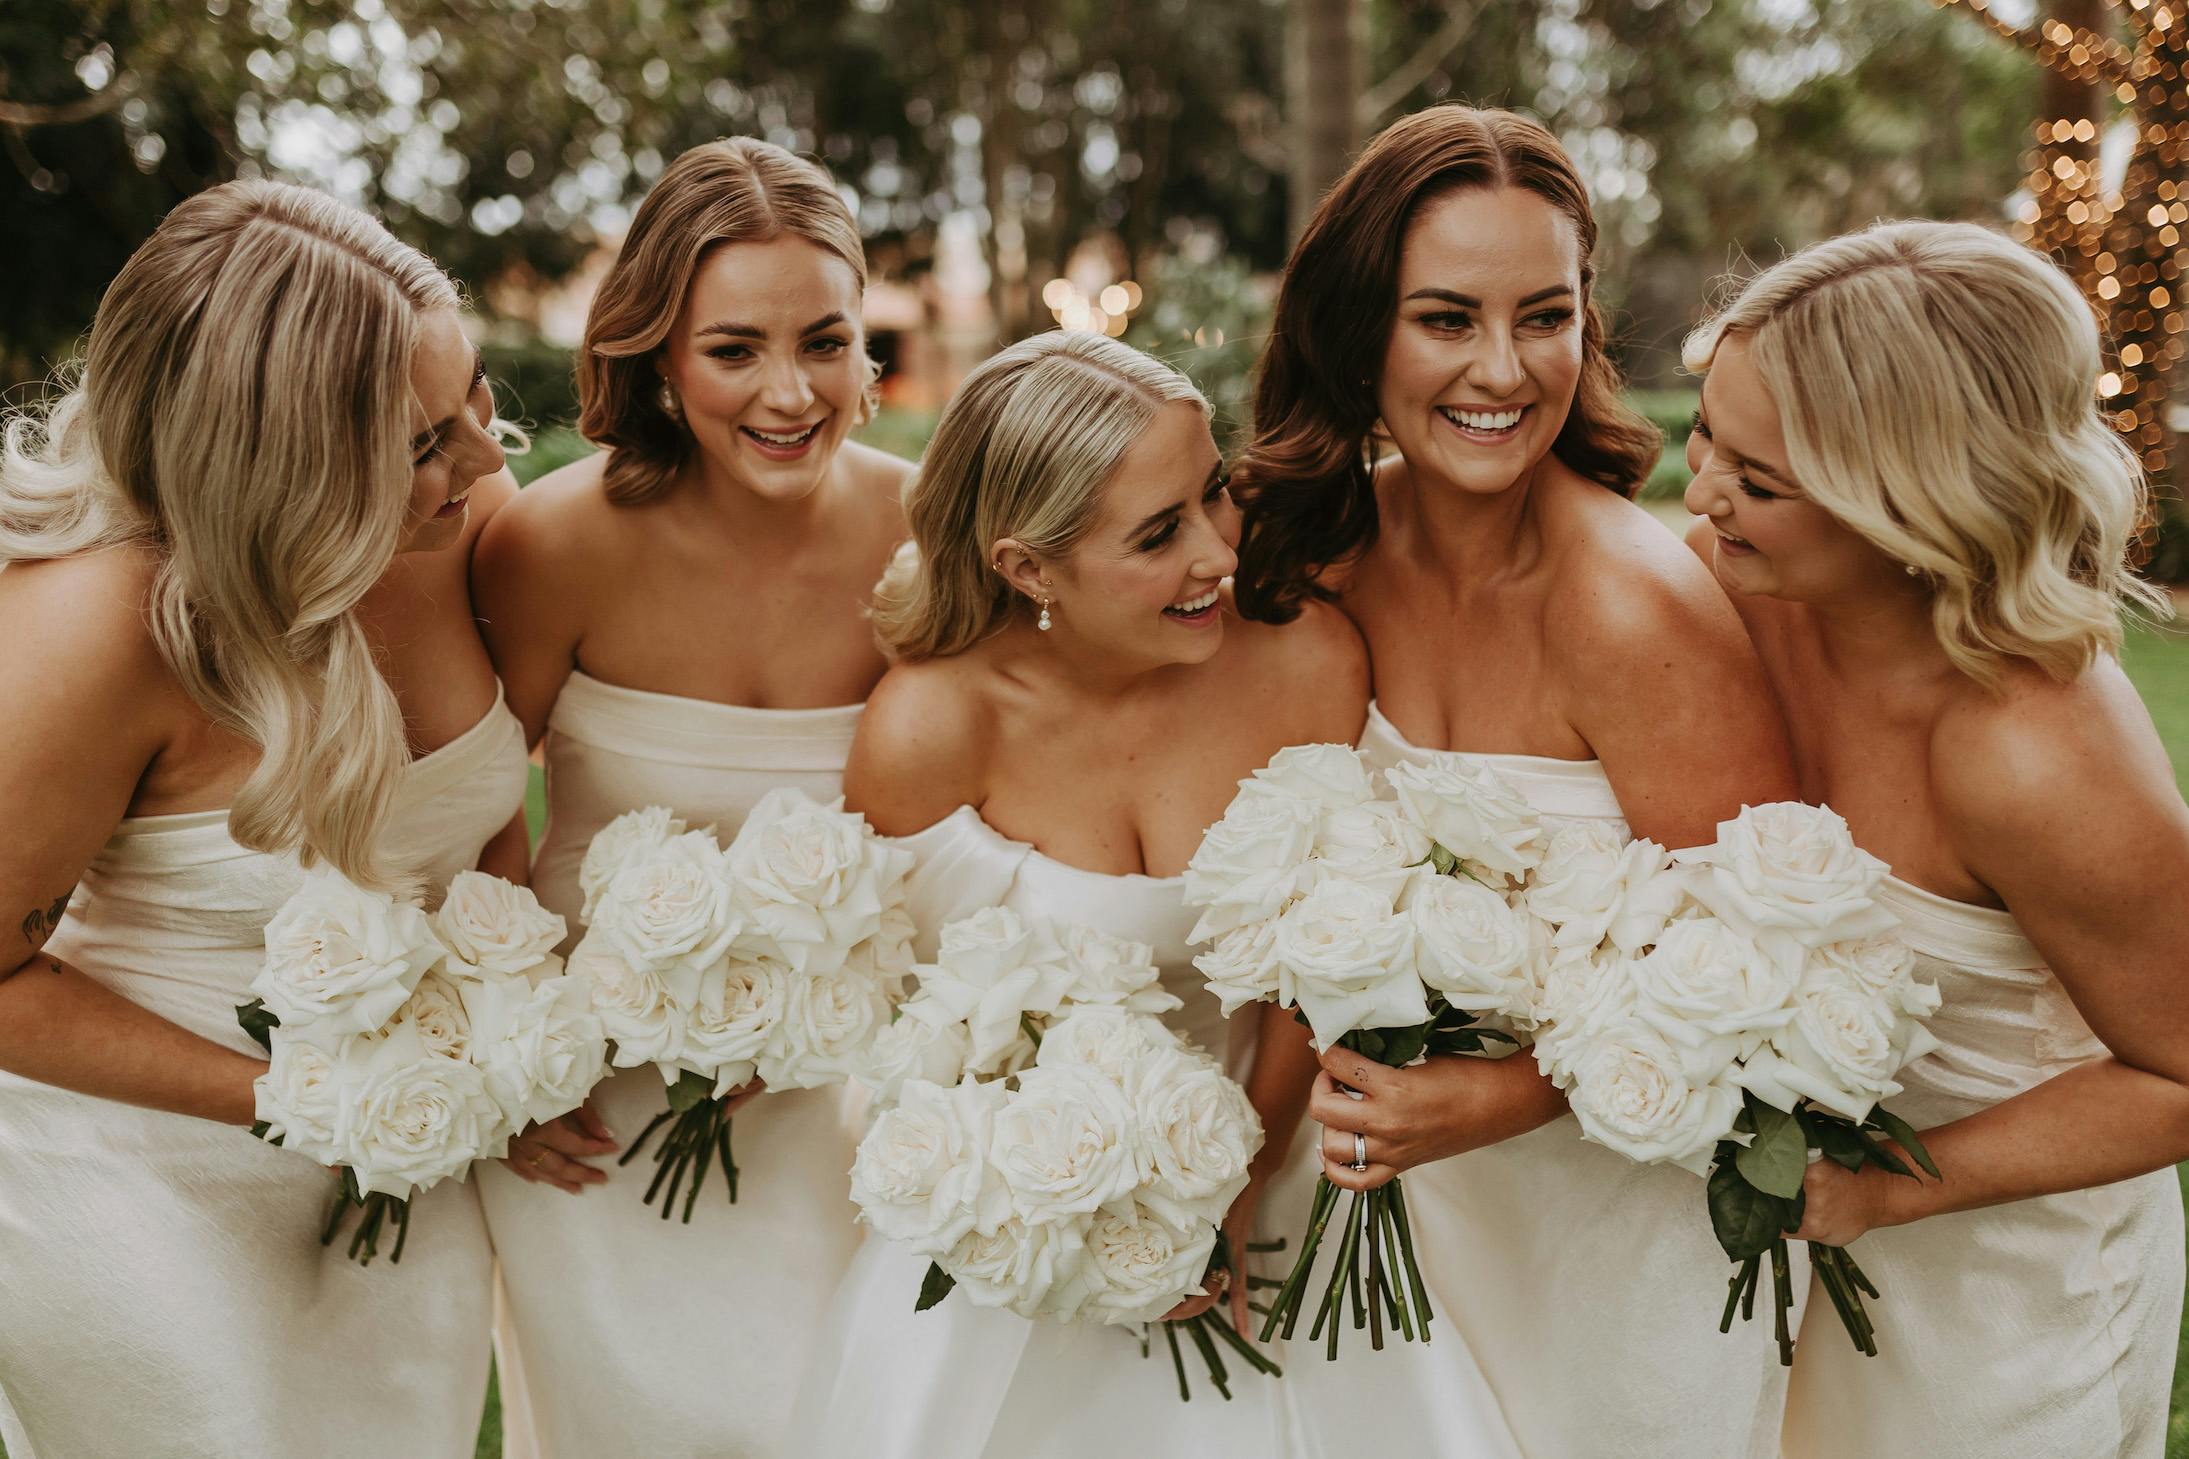 Five women in off-shoulder white dresses stand closely together, smiling and holding white rose bouquets. They appear joyful, with greenery and twinkling lights in the background, suggesting a festive or celebratory occasion.